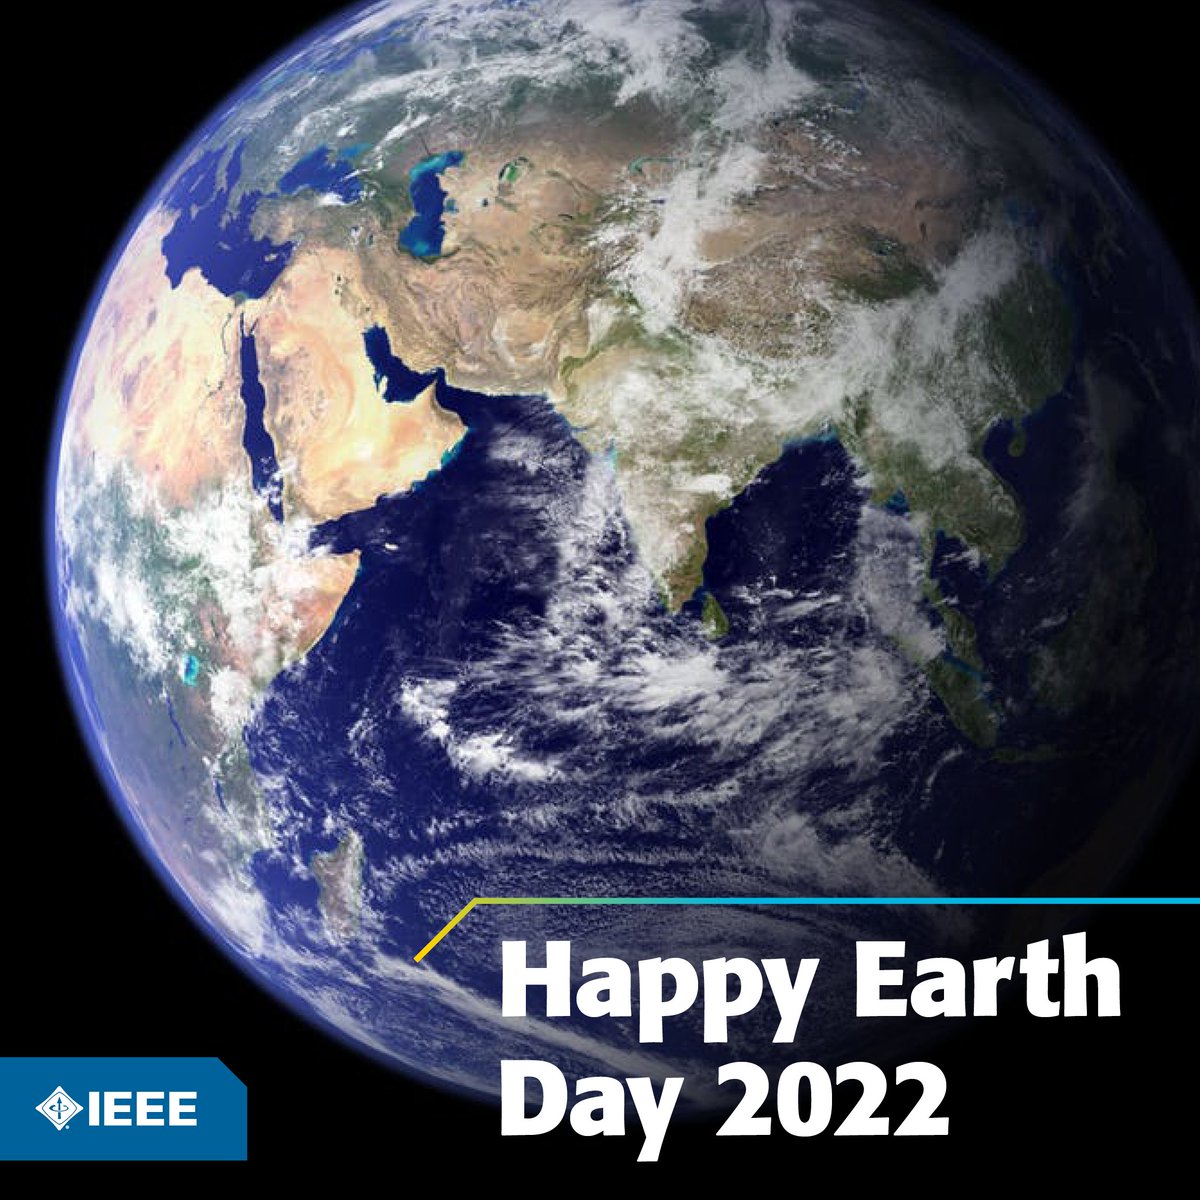 In honor of Earth Day, I would like to reaffirm the global #IEEE community's commitment to developing solutions to alleviate the impact of climate change for the betterment of humanity.